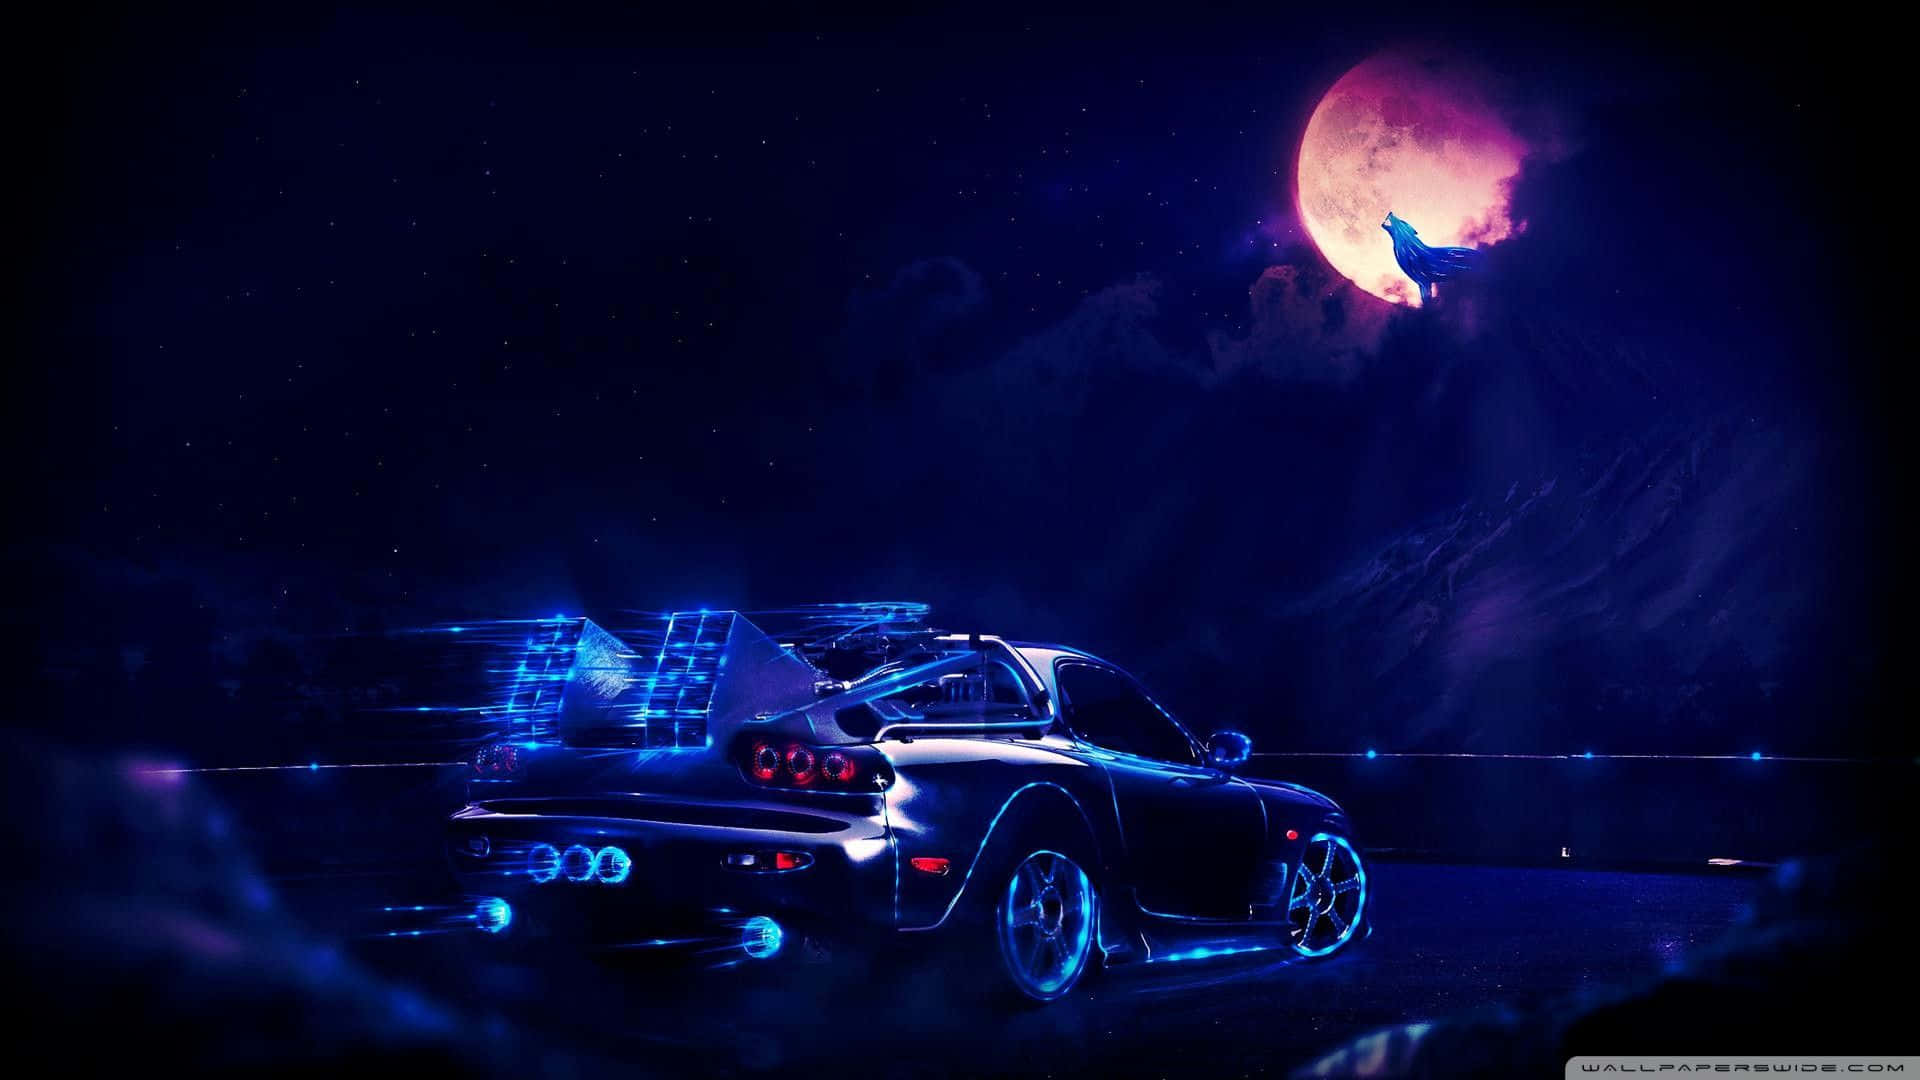 A Car Is Shown In The Night Sky With A Blue Light